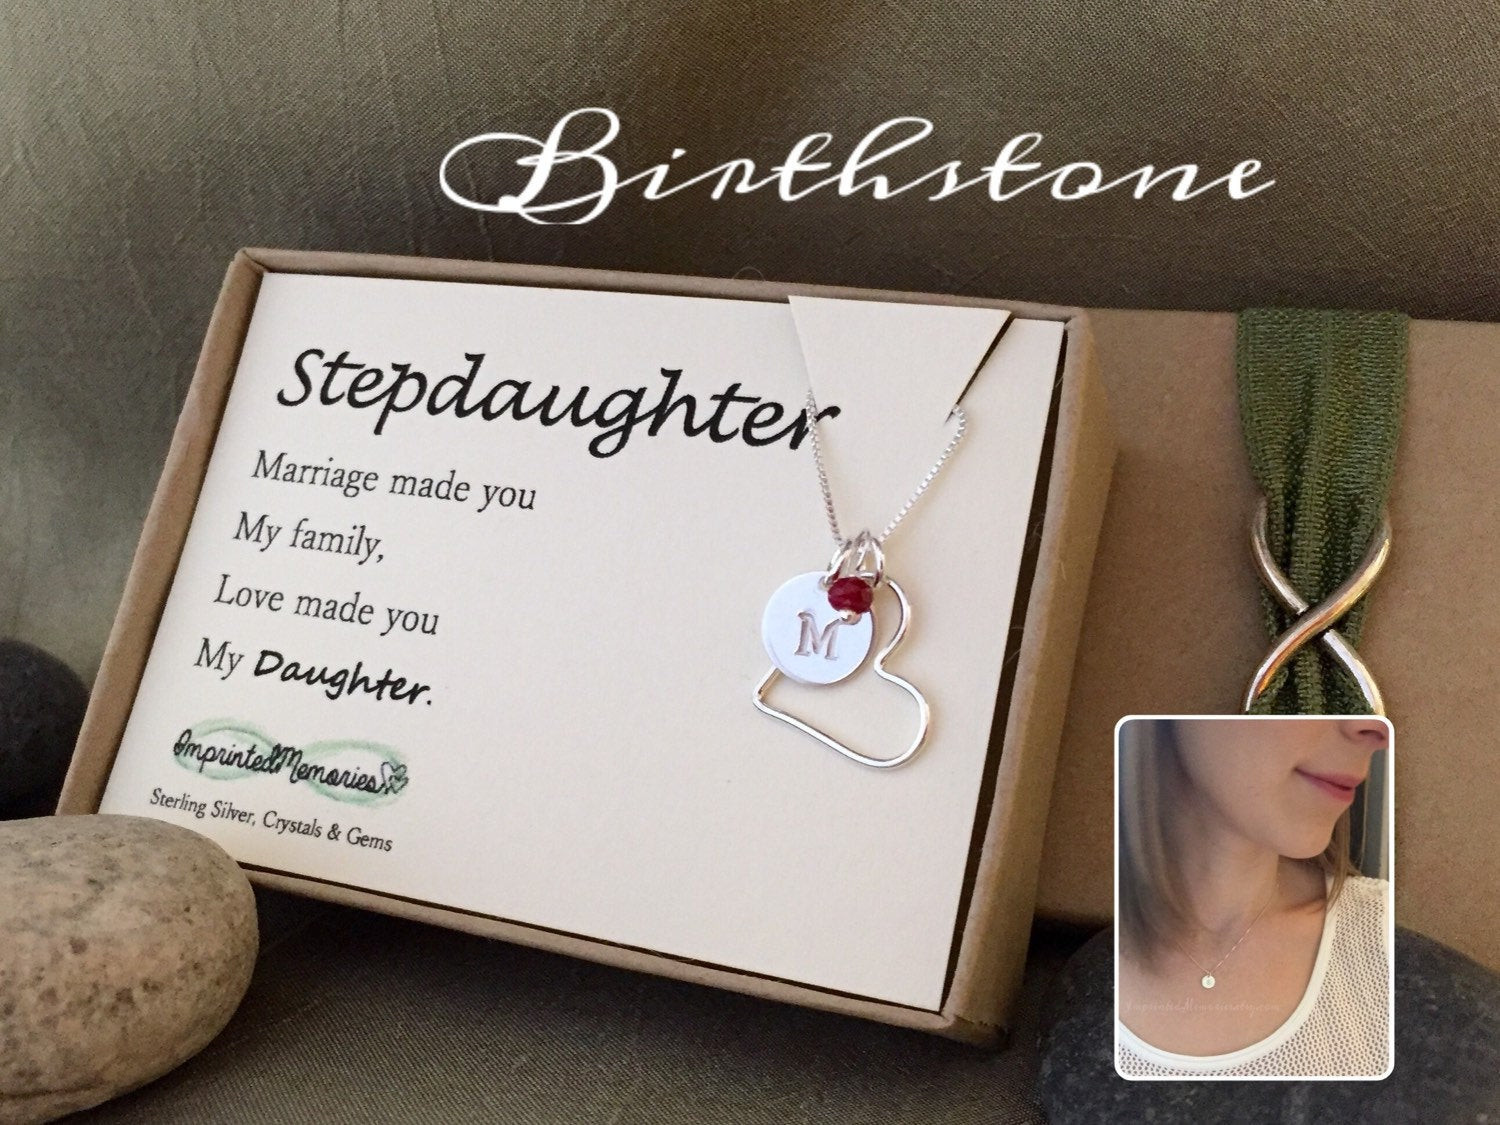 Mother To Daughter Wedding Gift Ideas
 Stepdaughter t new stepdaughter wedding t marriage